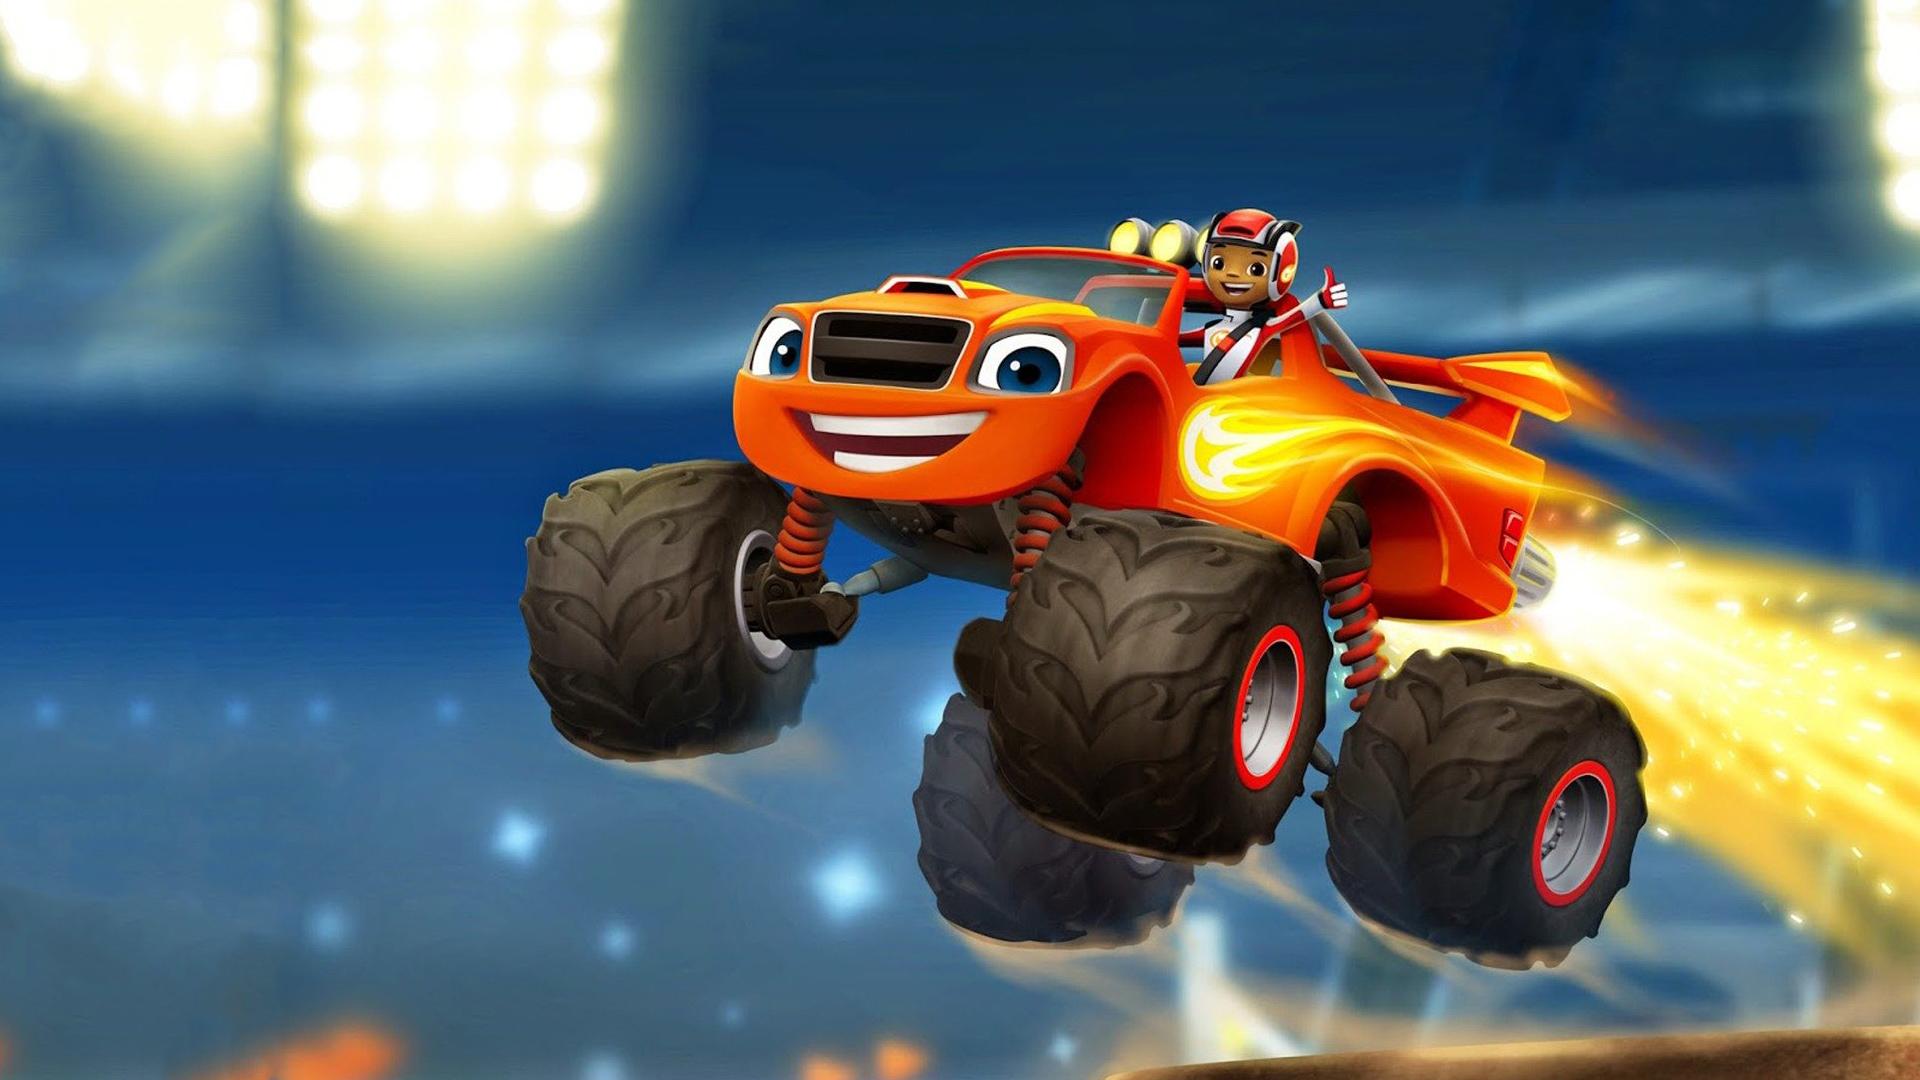 Tons of awesome Blaze and the Monster Machines wallpapers to download for f...